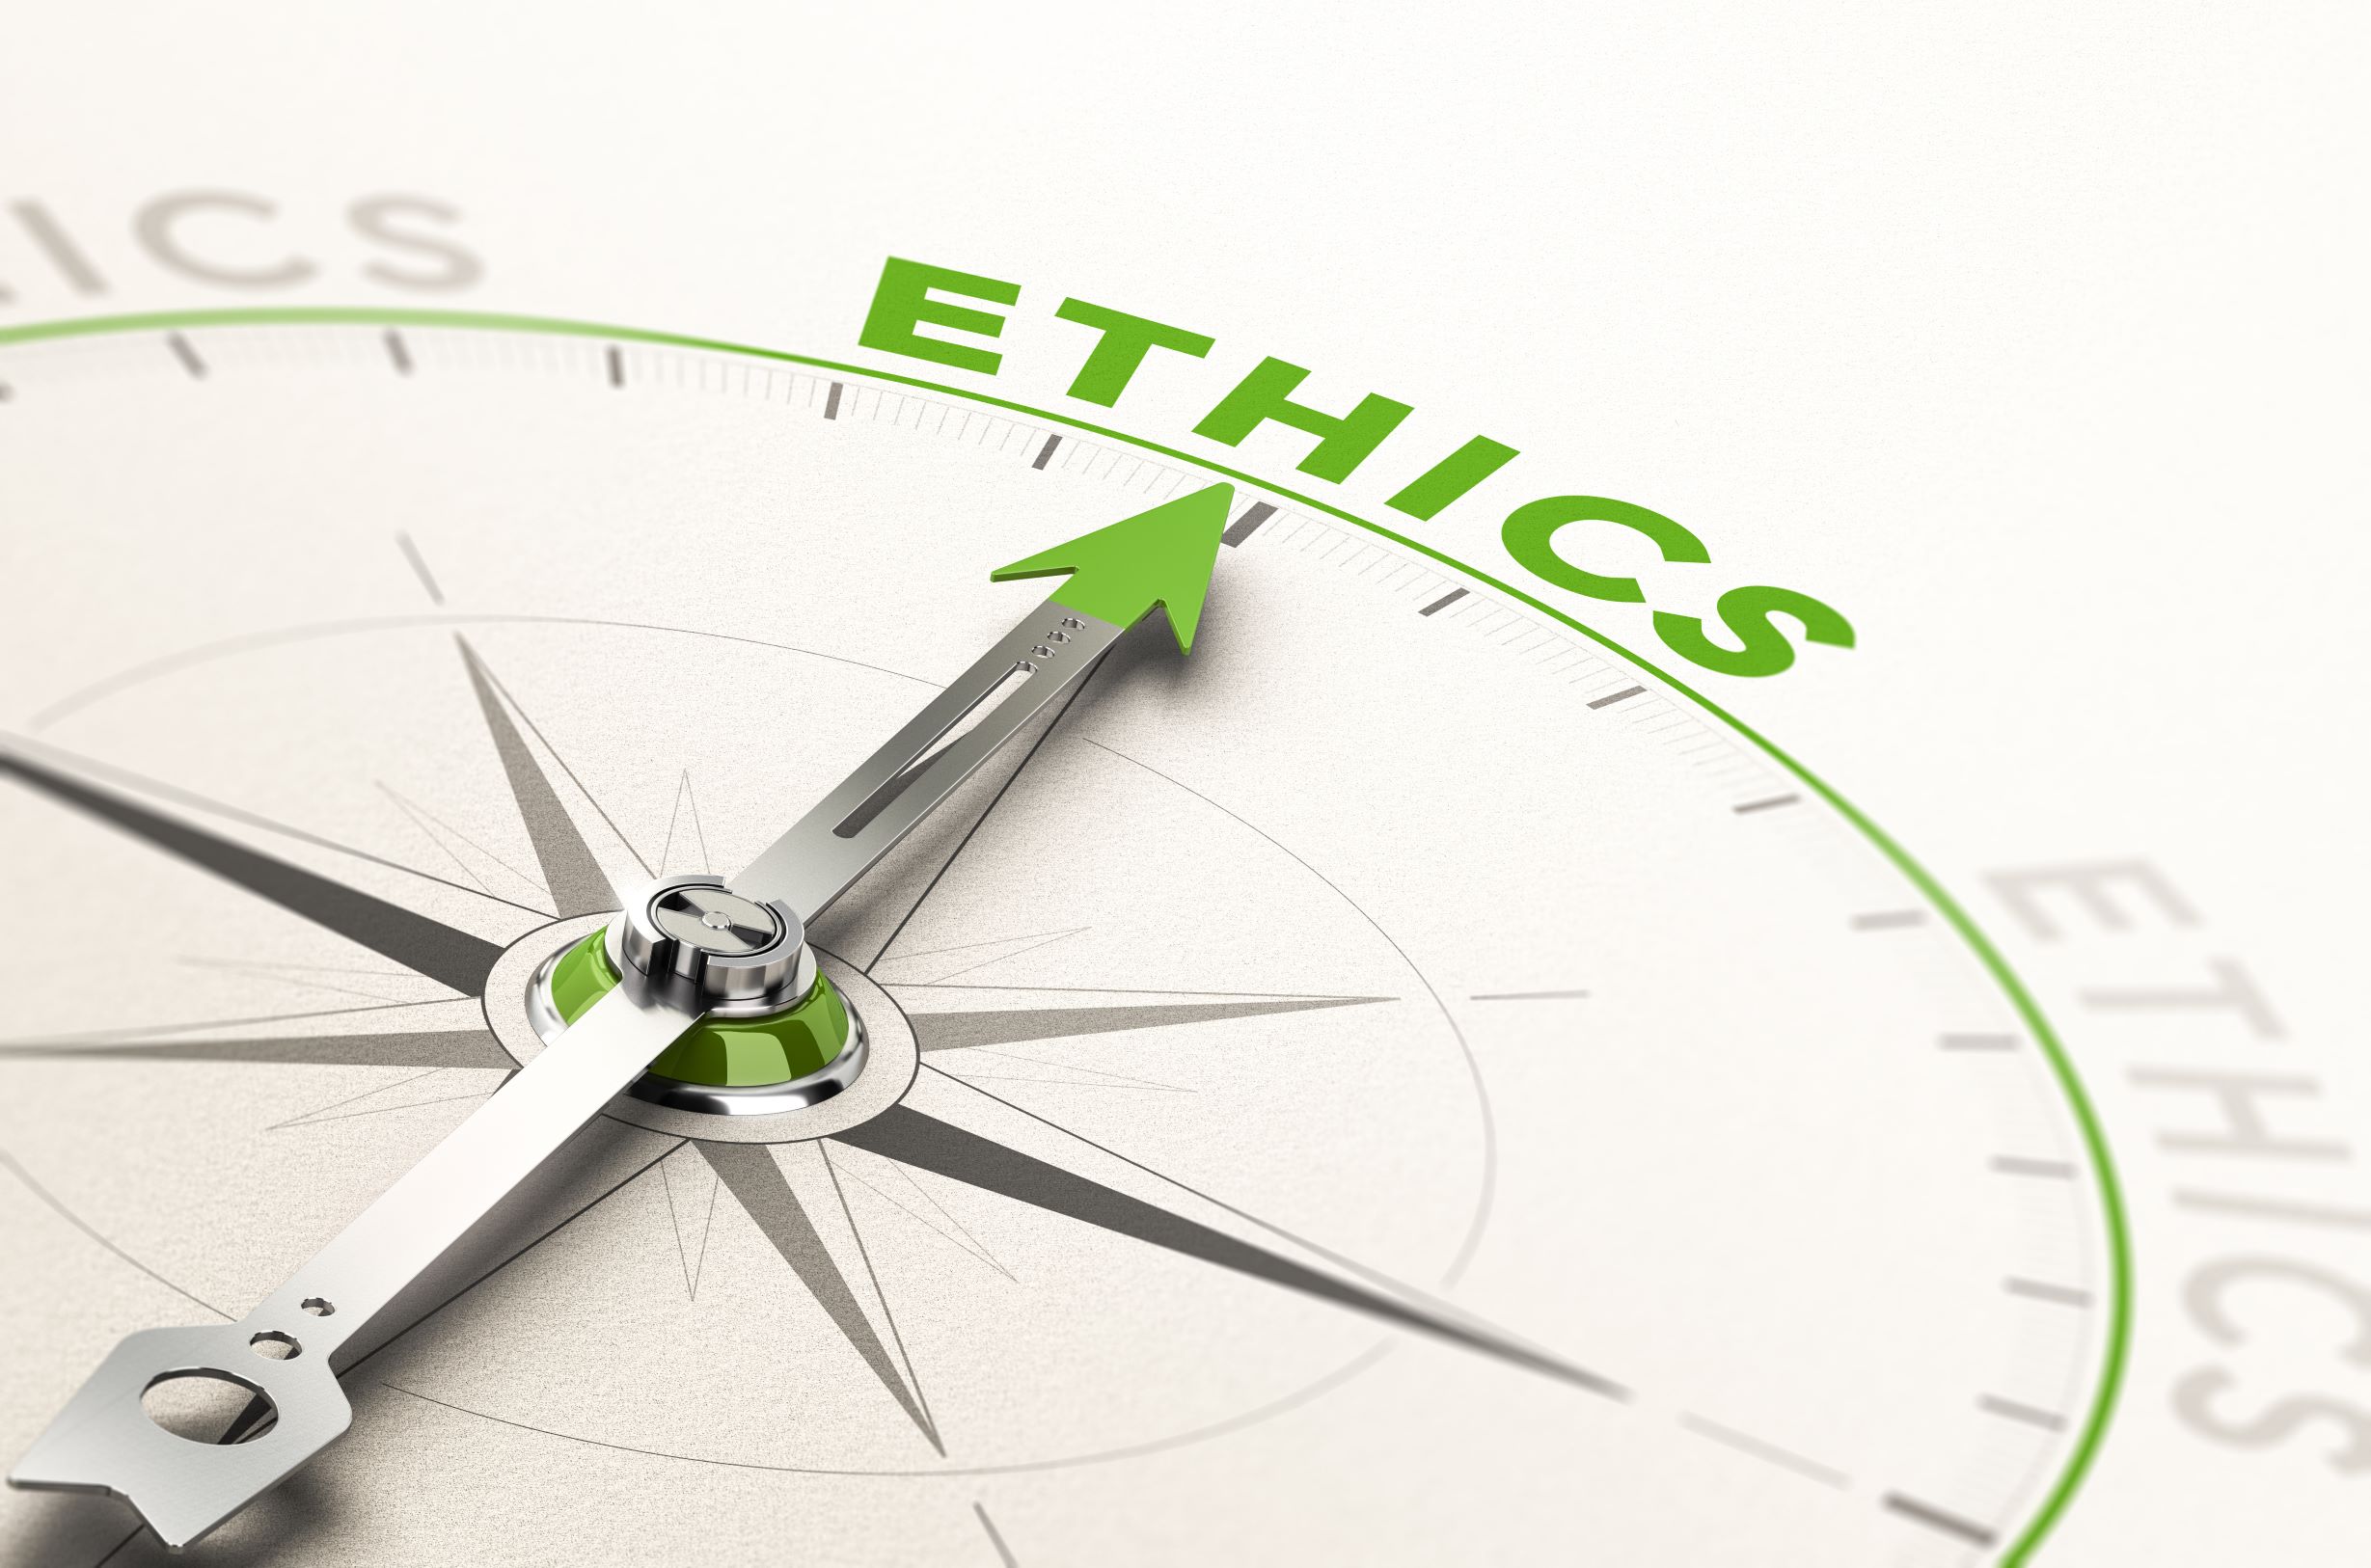 Corporate and personal ethics in business